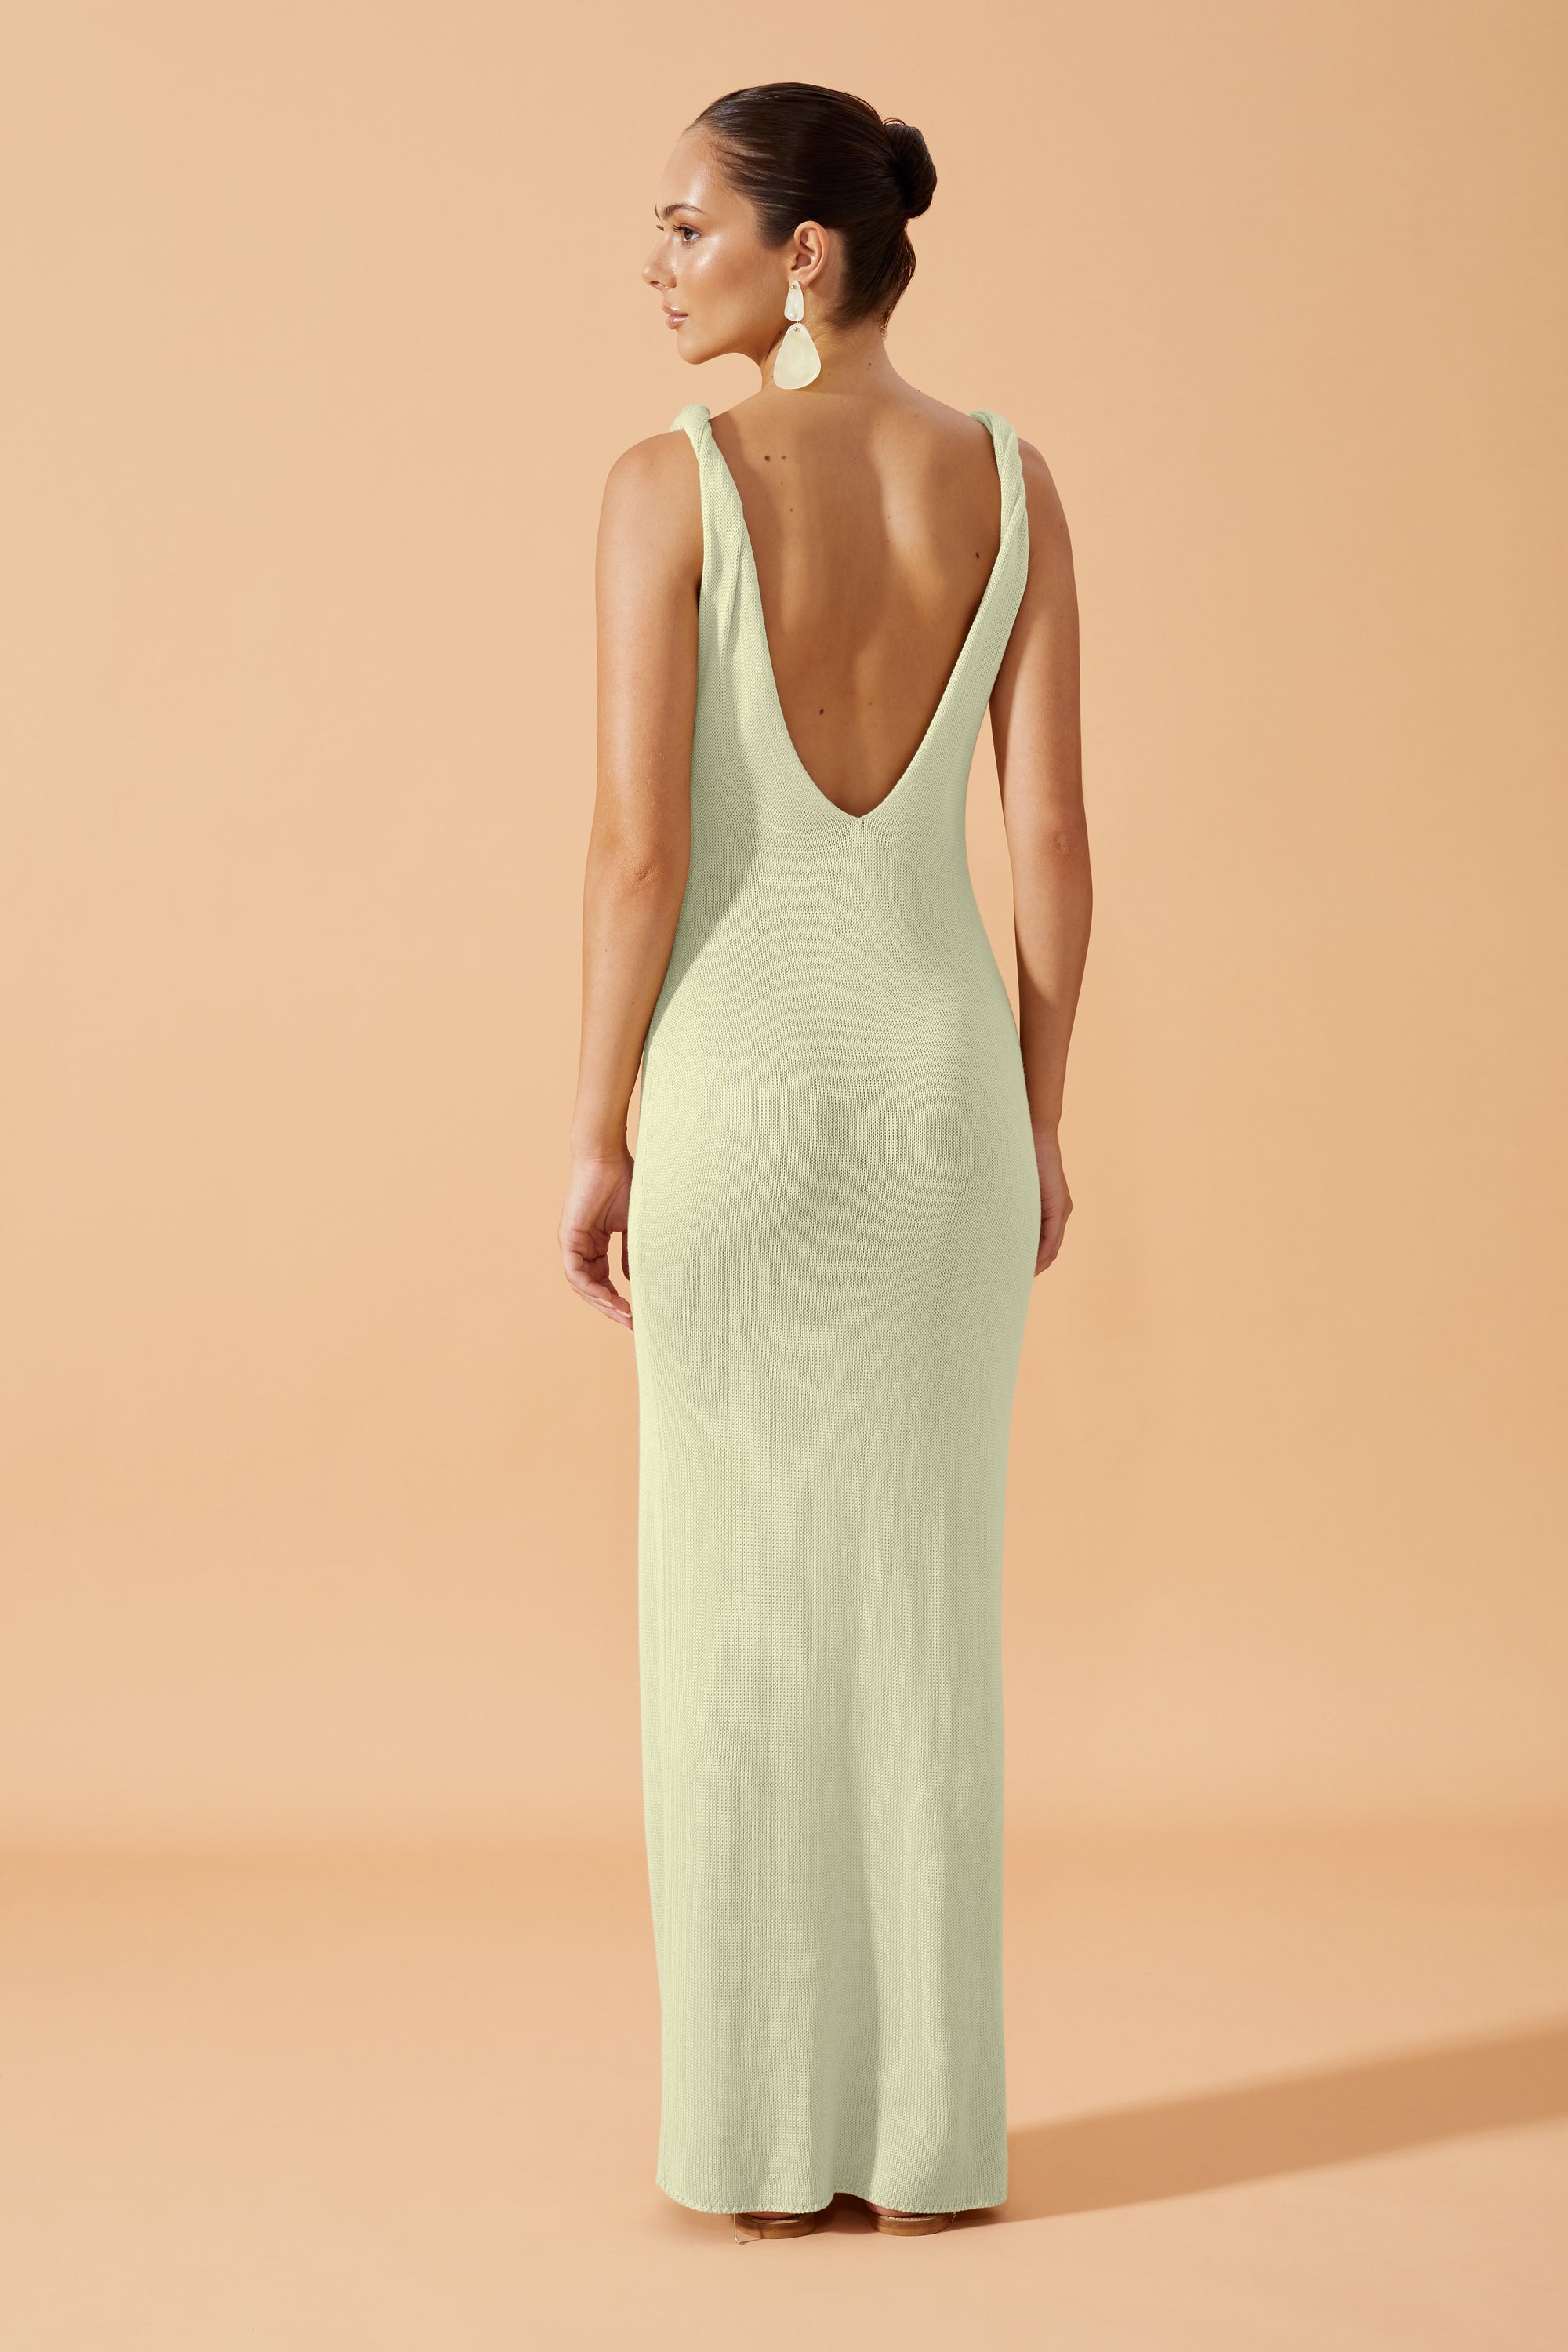 Flook The Label Anaya  Long Dress with side slit in  Pistachio,  worn with drop earrings back view